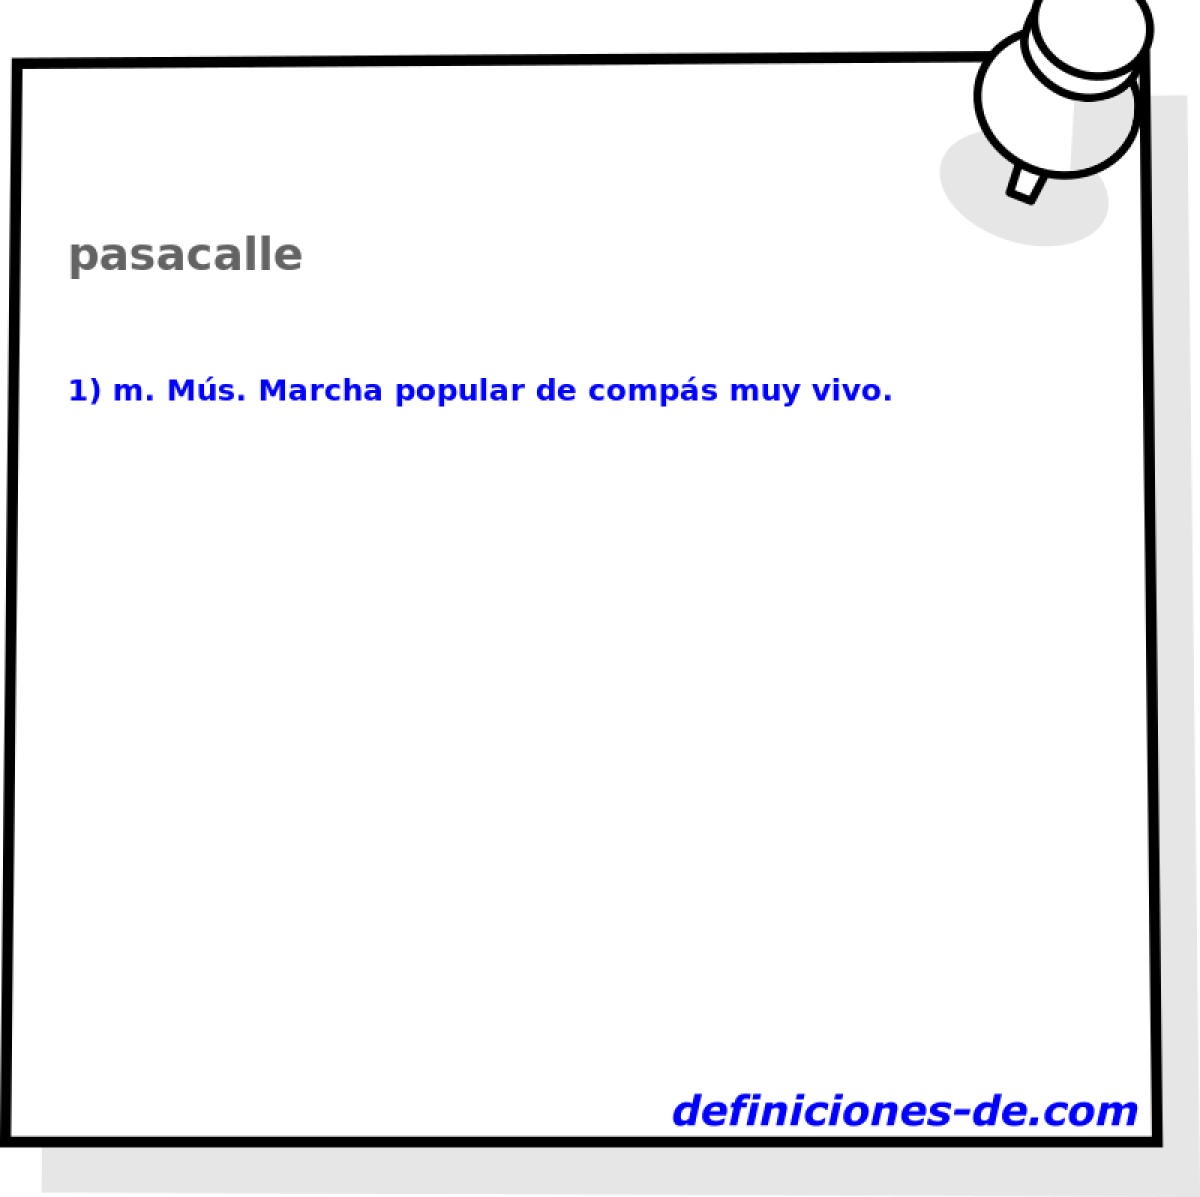 pasacalle 